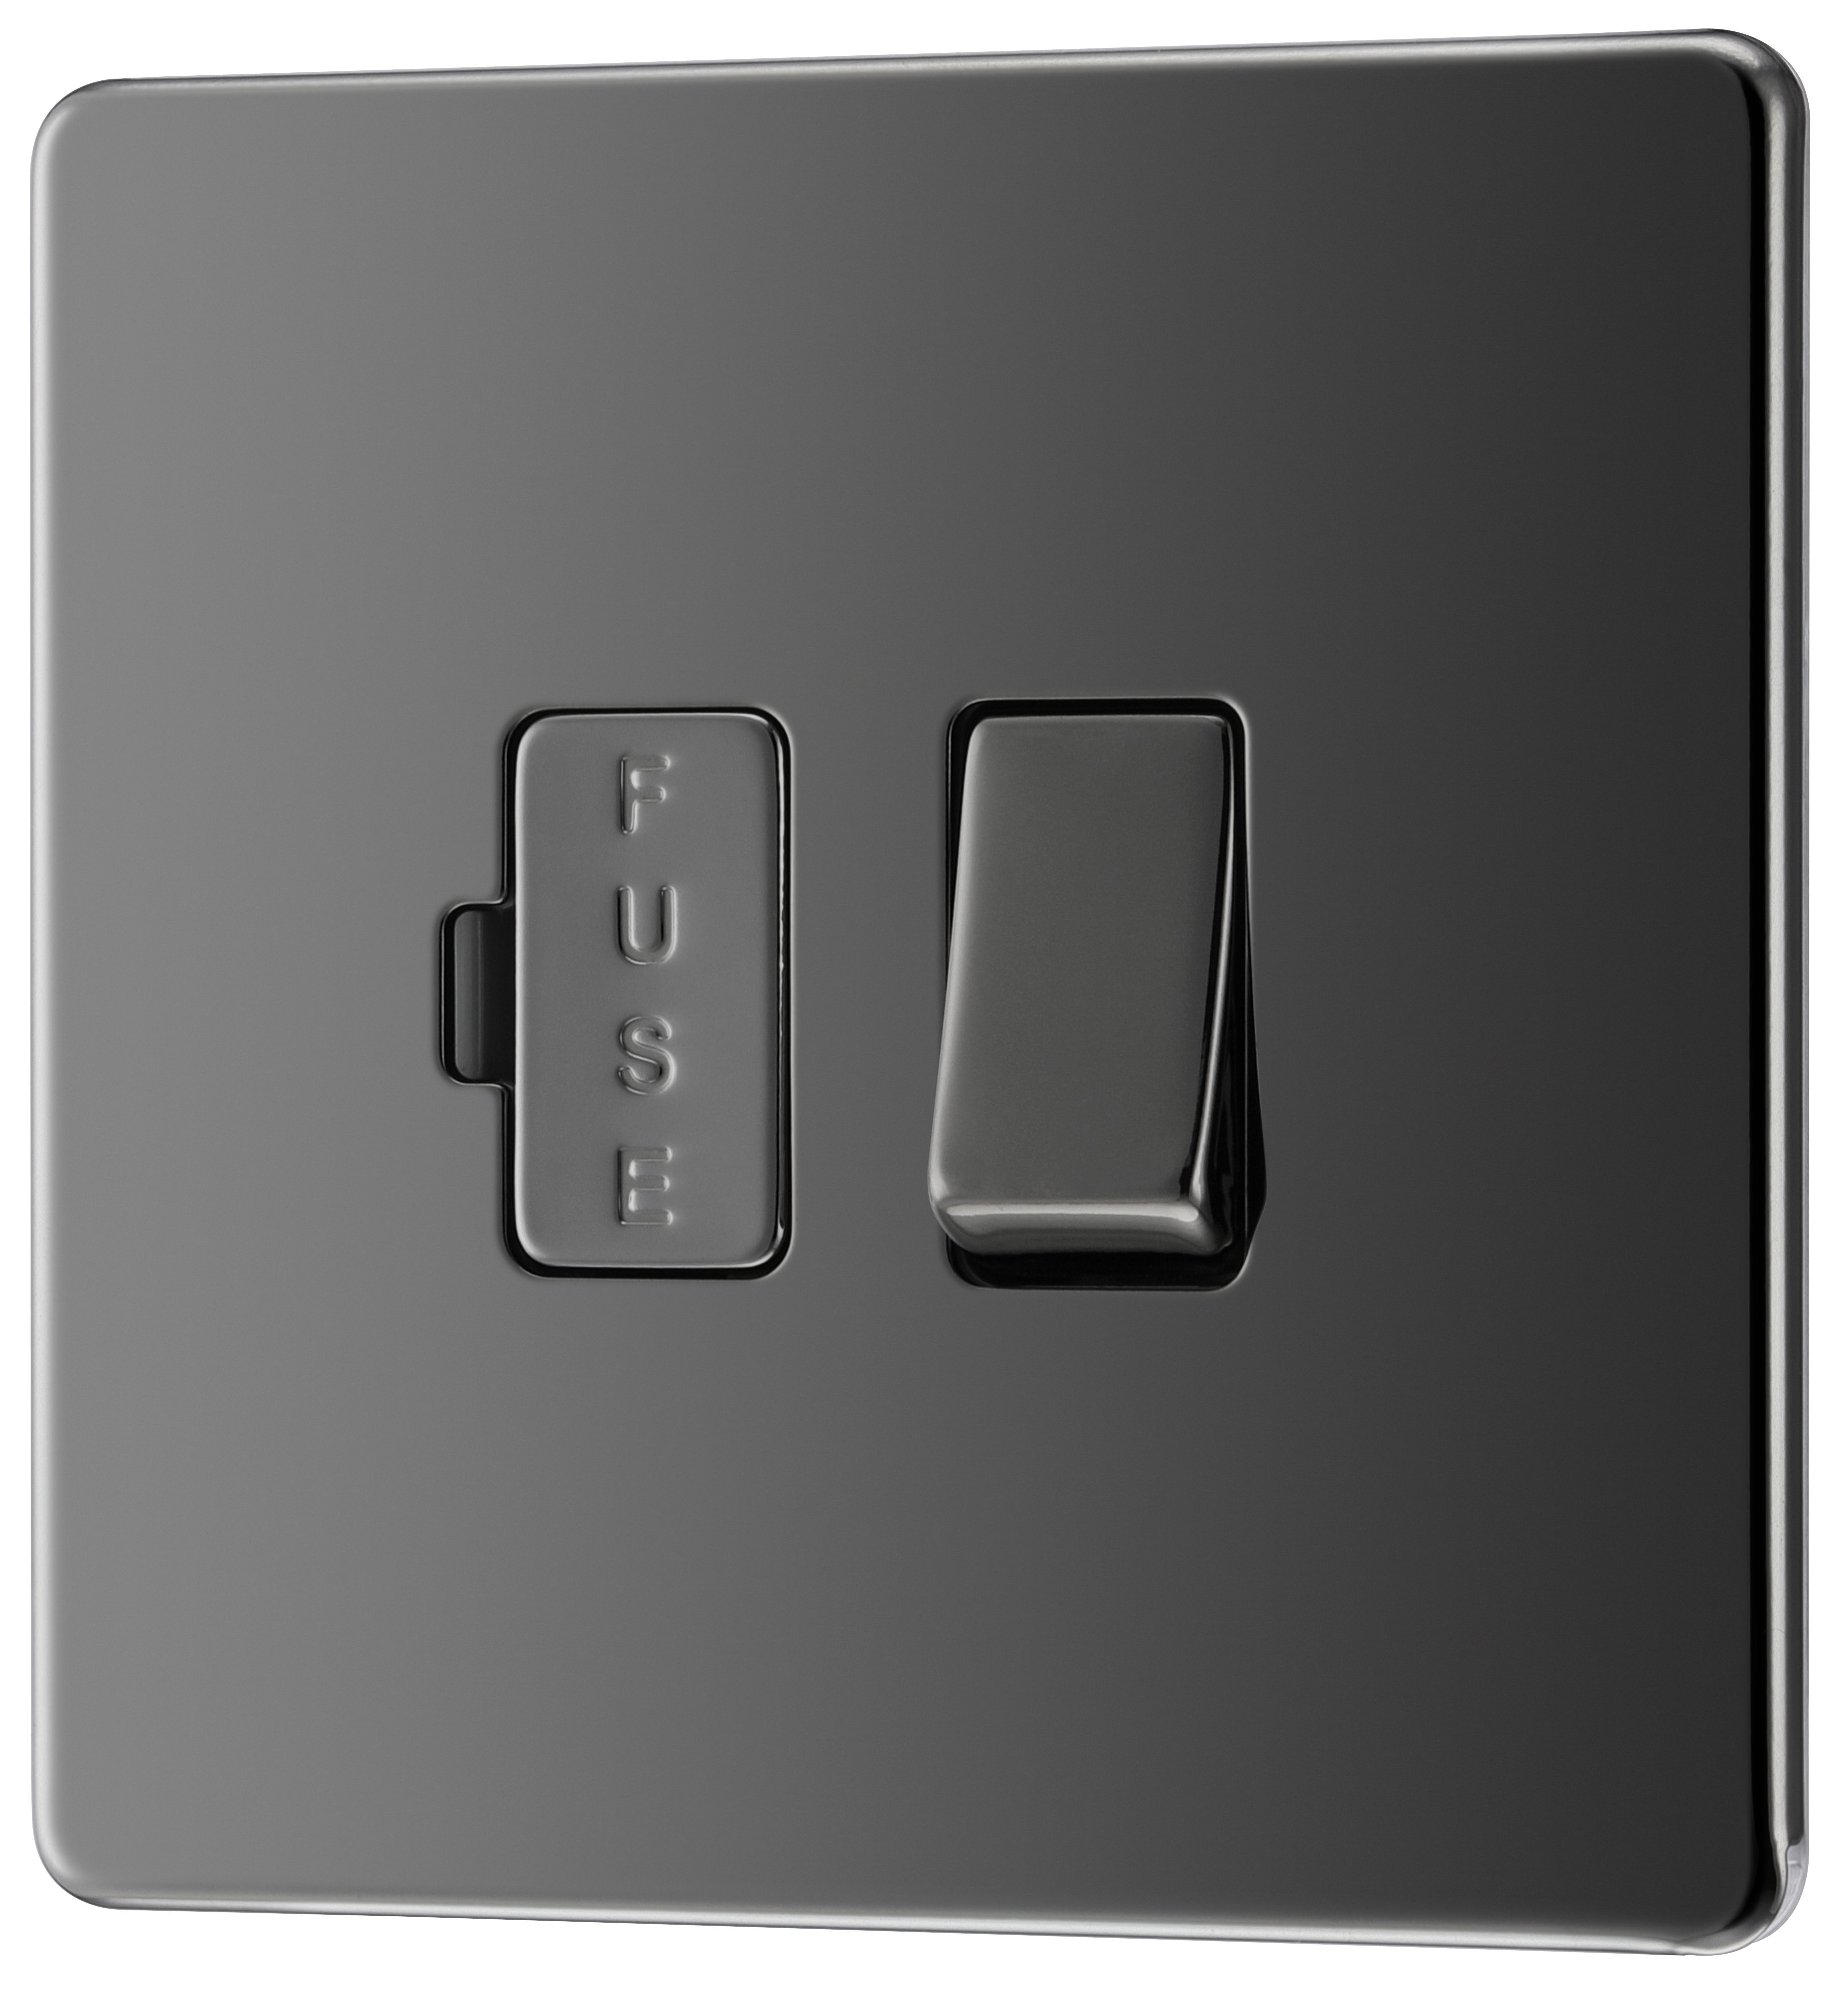 GoodHome Black Nickel 13A 2 way Flat profile Screwless Switched Fused connection unit